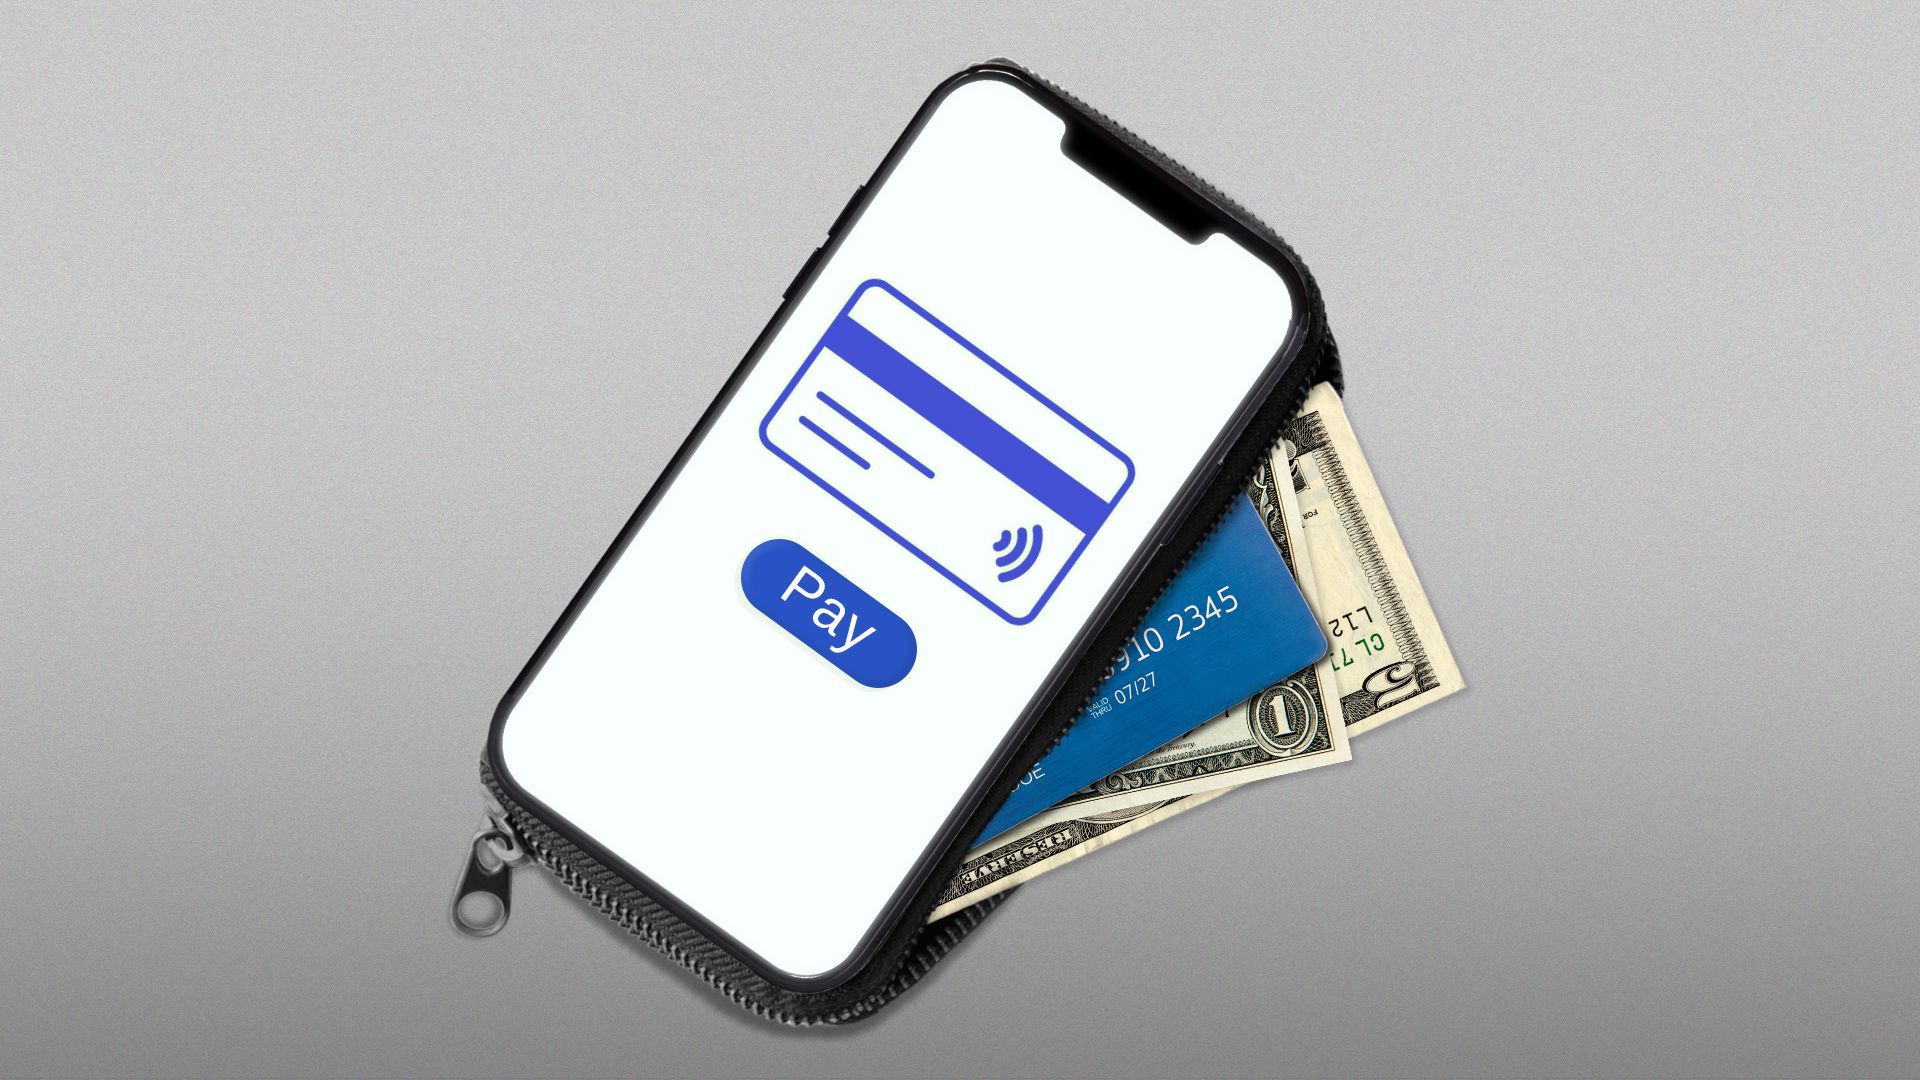 Illustration of a phone with a mobile payment icon on the screen, unzipping to show cards and money inside.